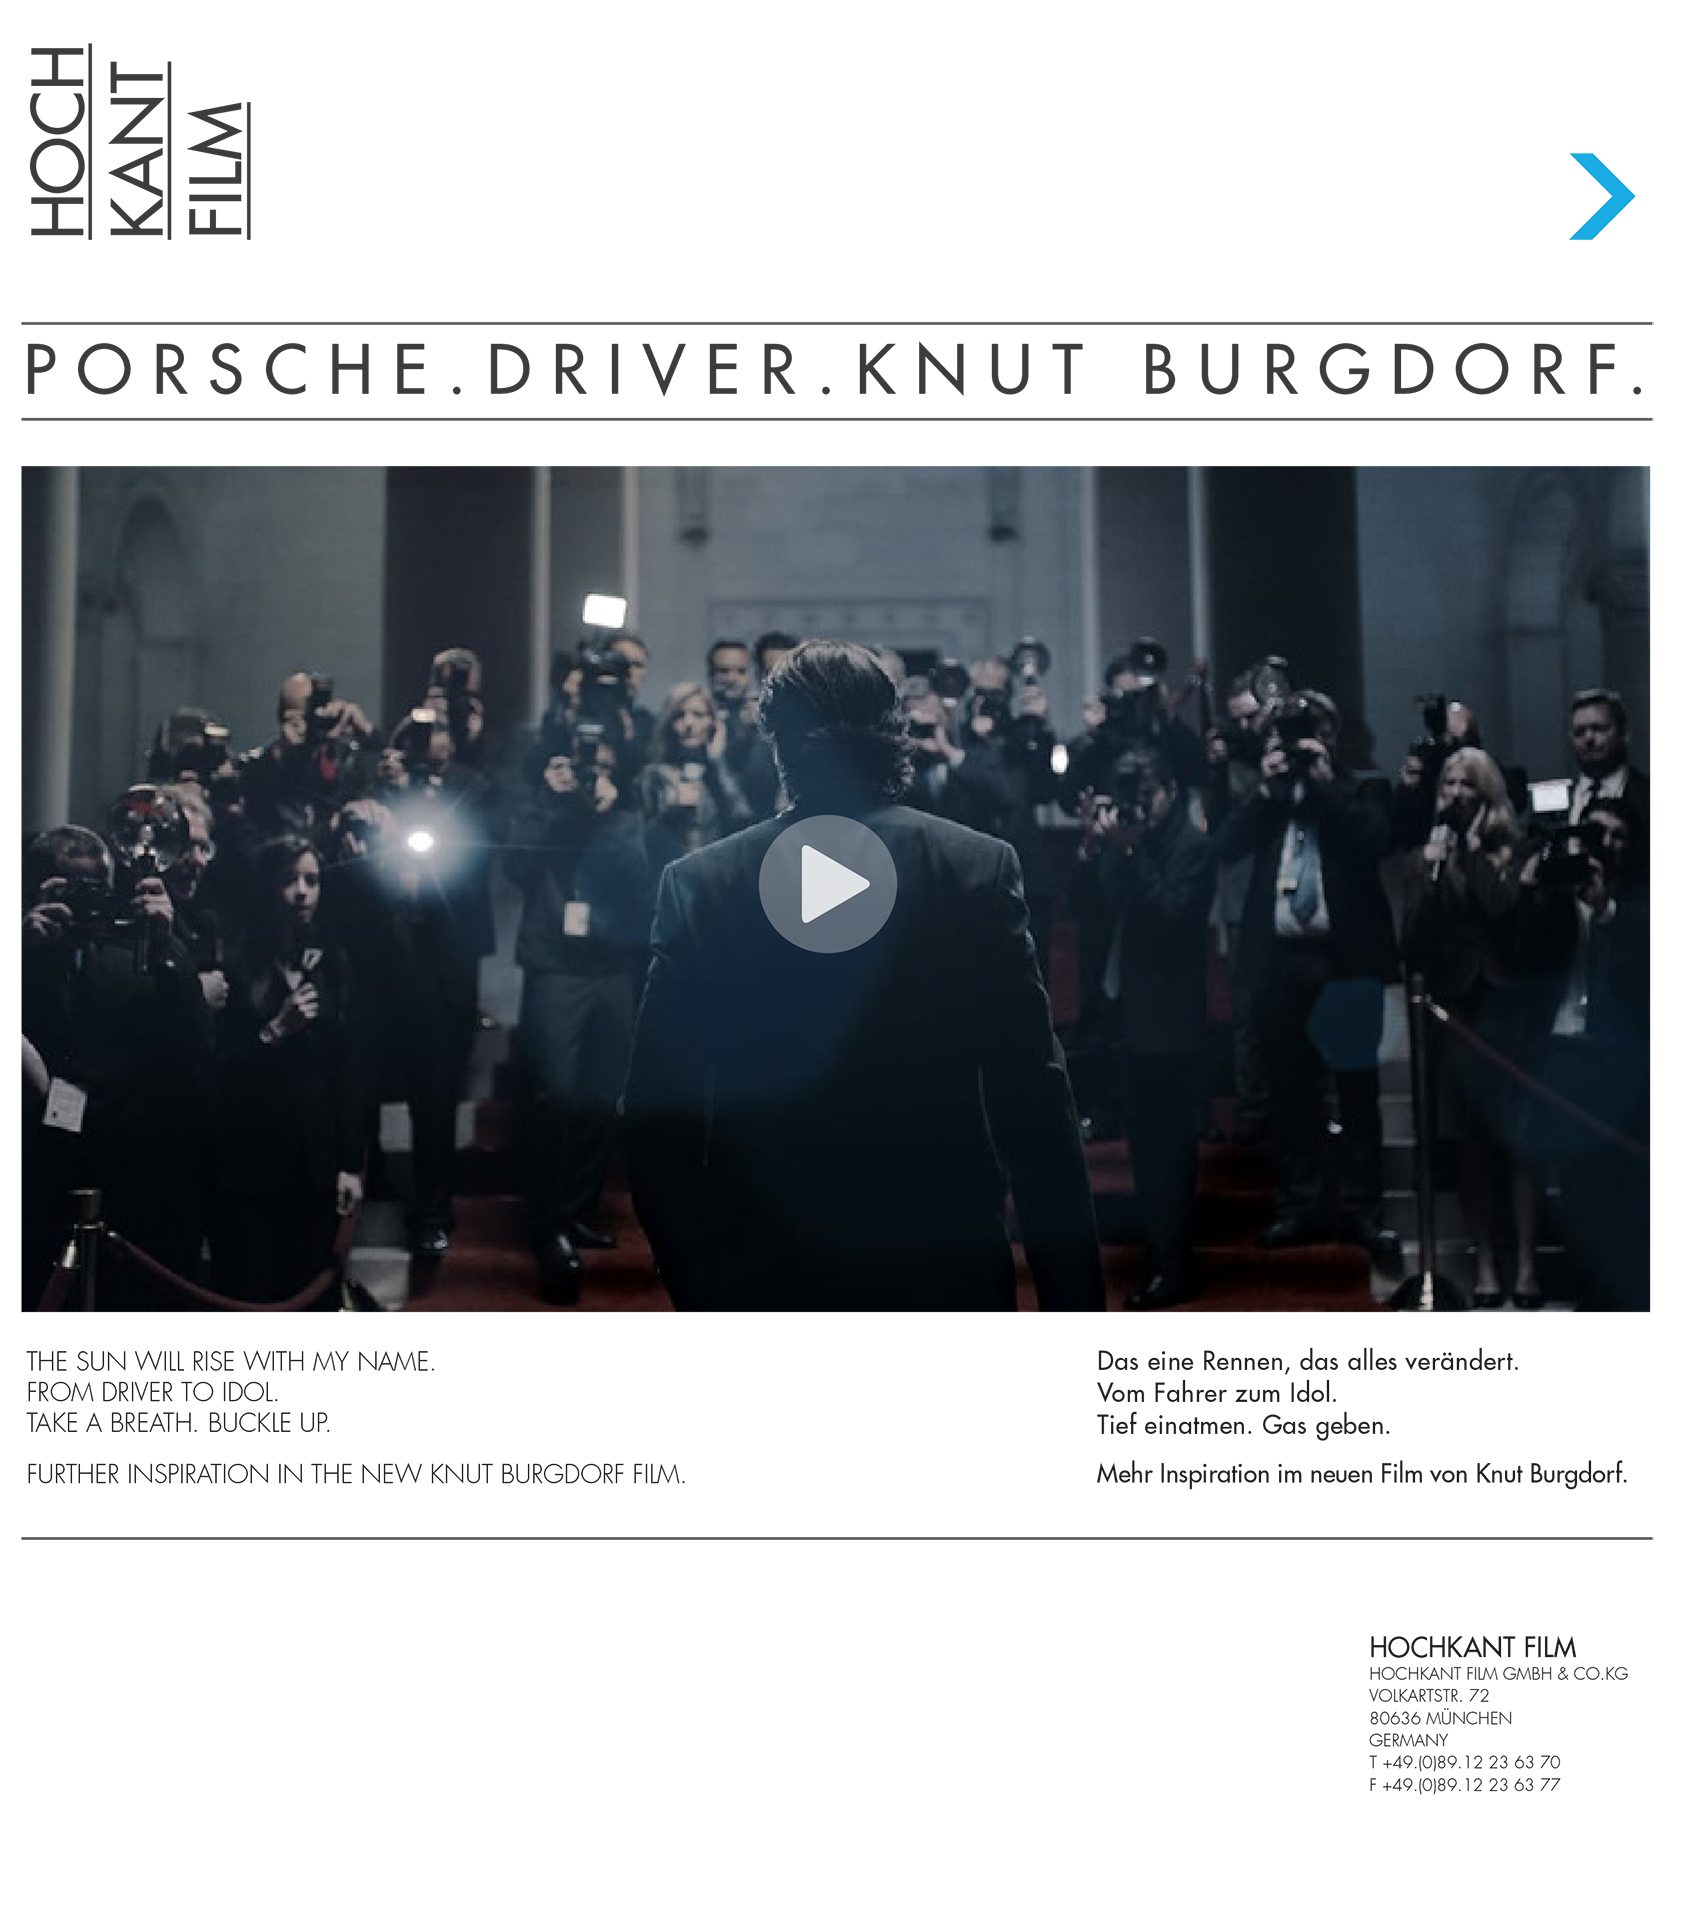 The sun will rise with my name. From driver to idol. Take a breath. Buckle up. Further inspiration in the new Knut Burgdorf Film.